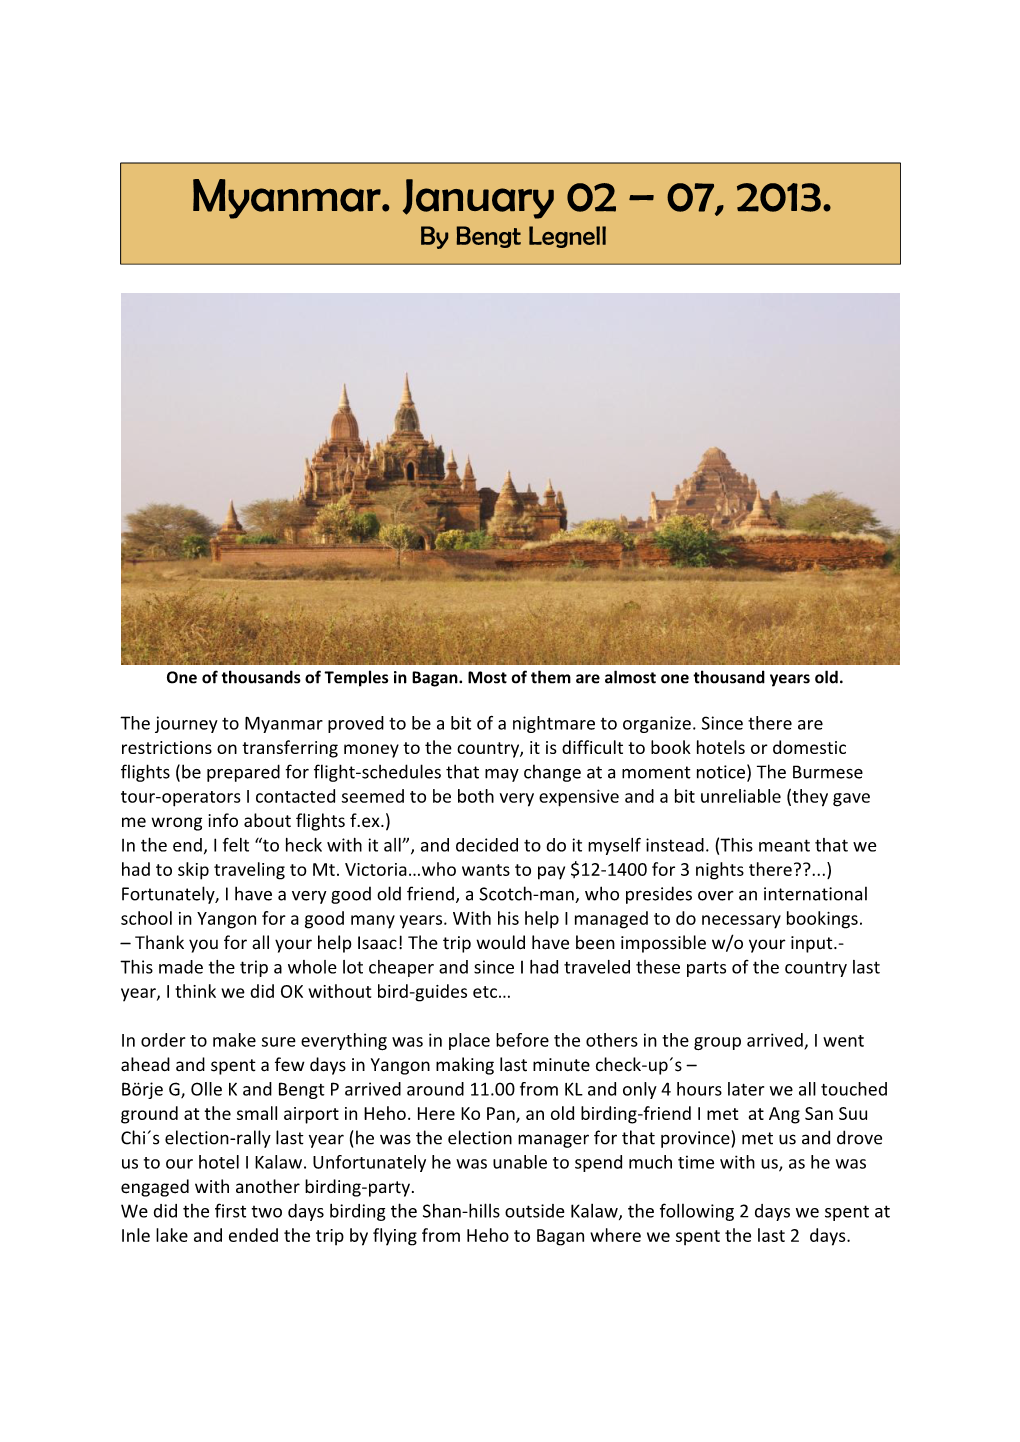 Myanmar. January 02 – 07, 2013. by Bengt Legnell